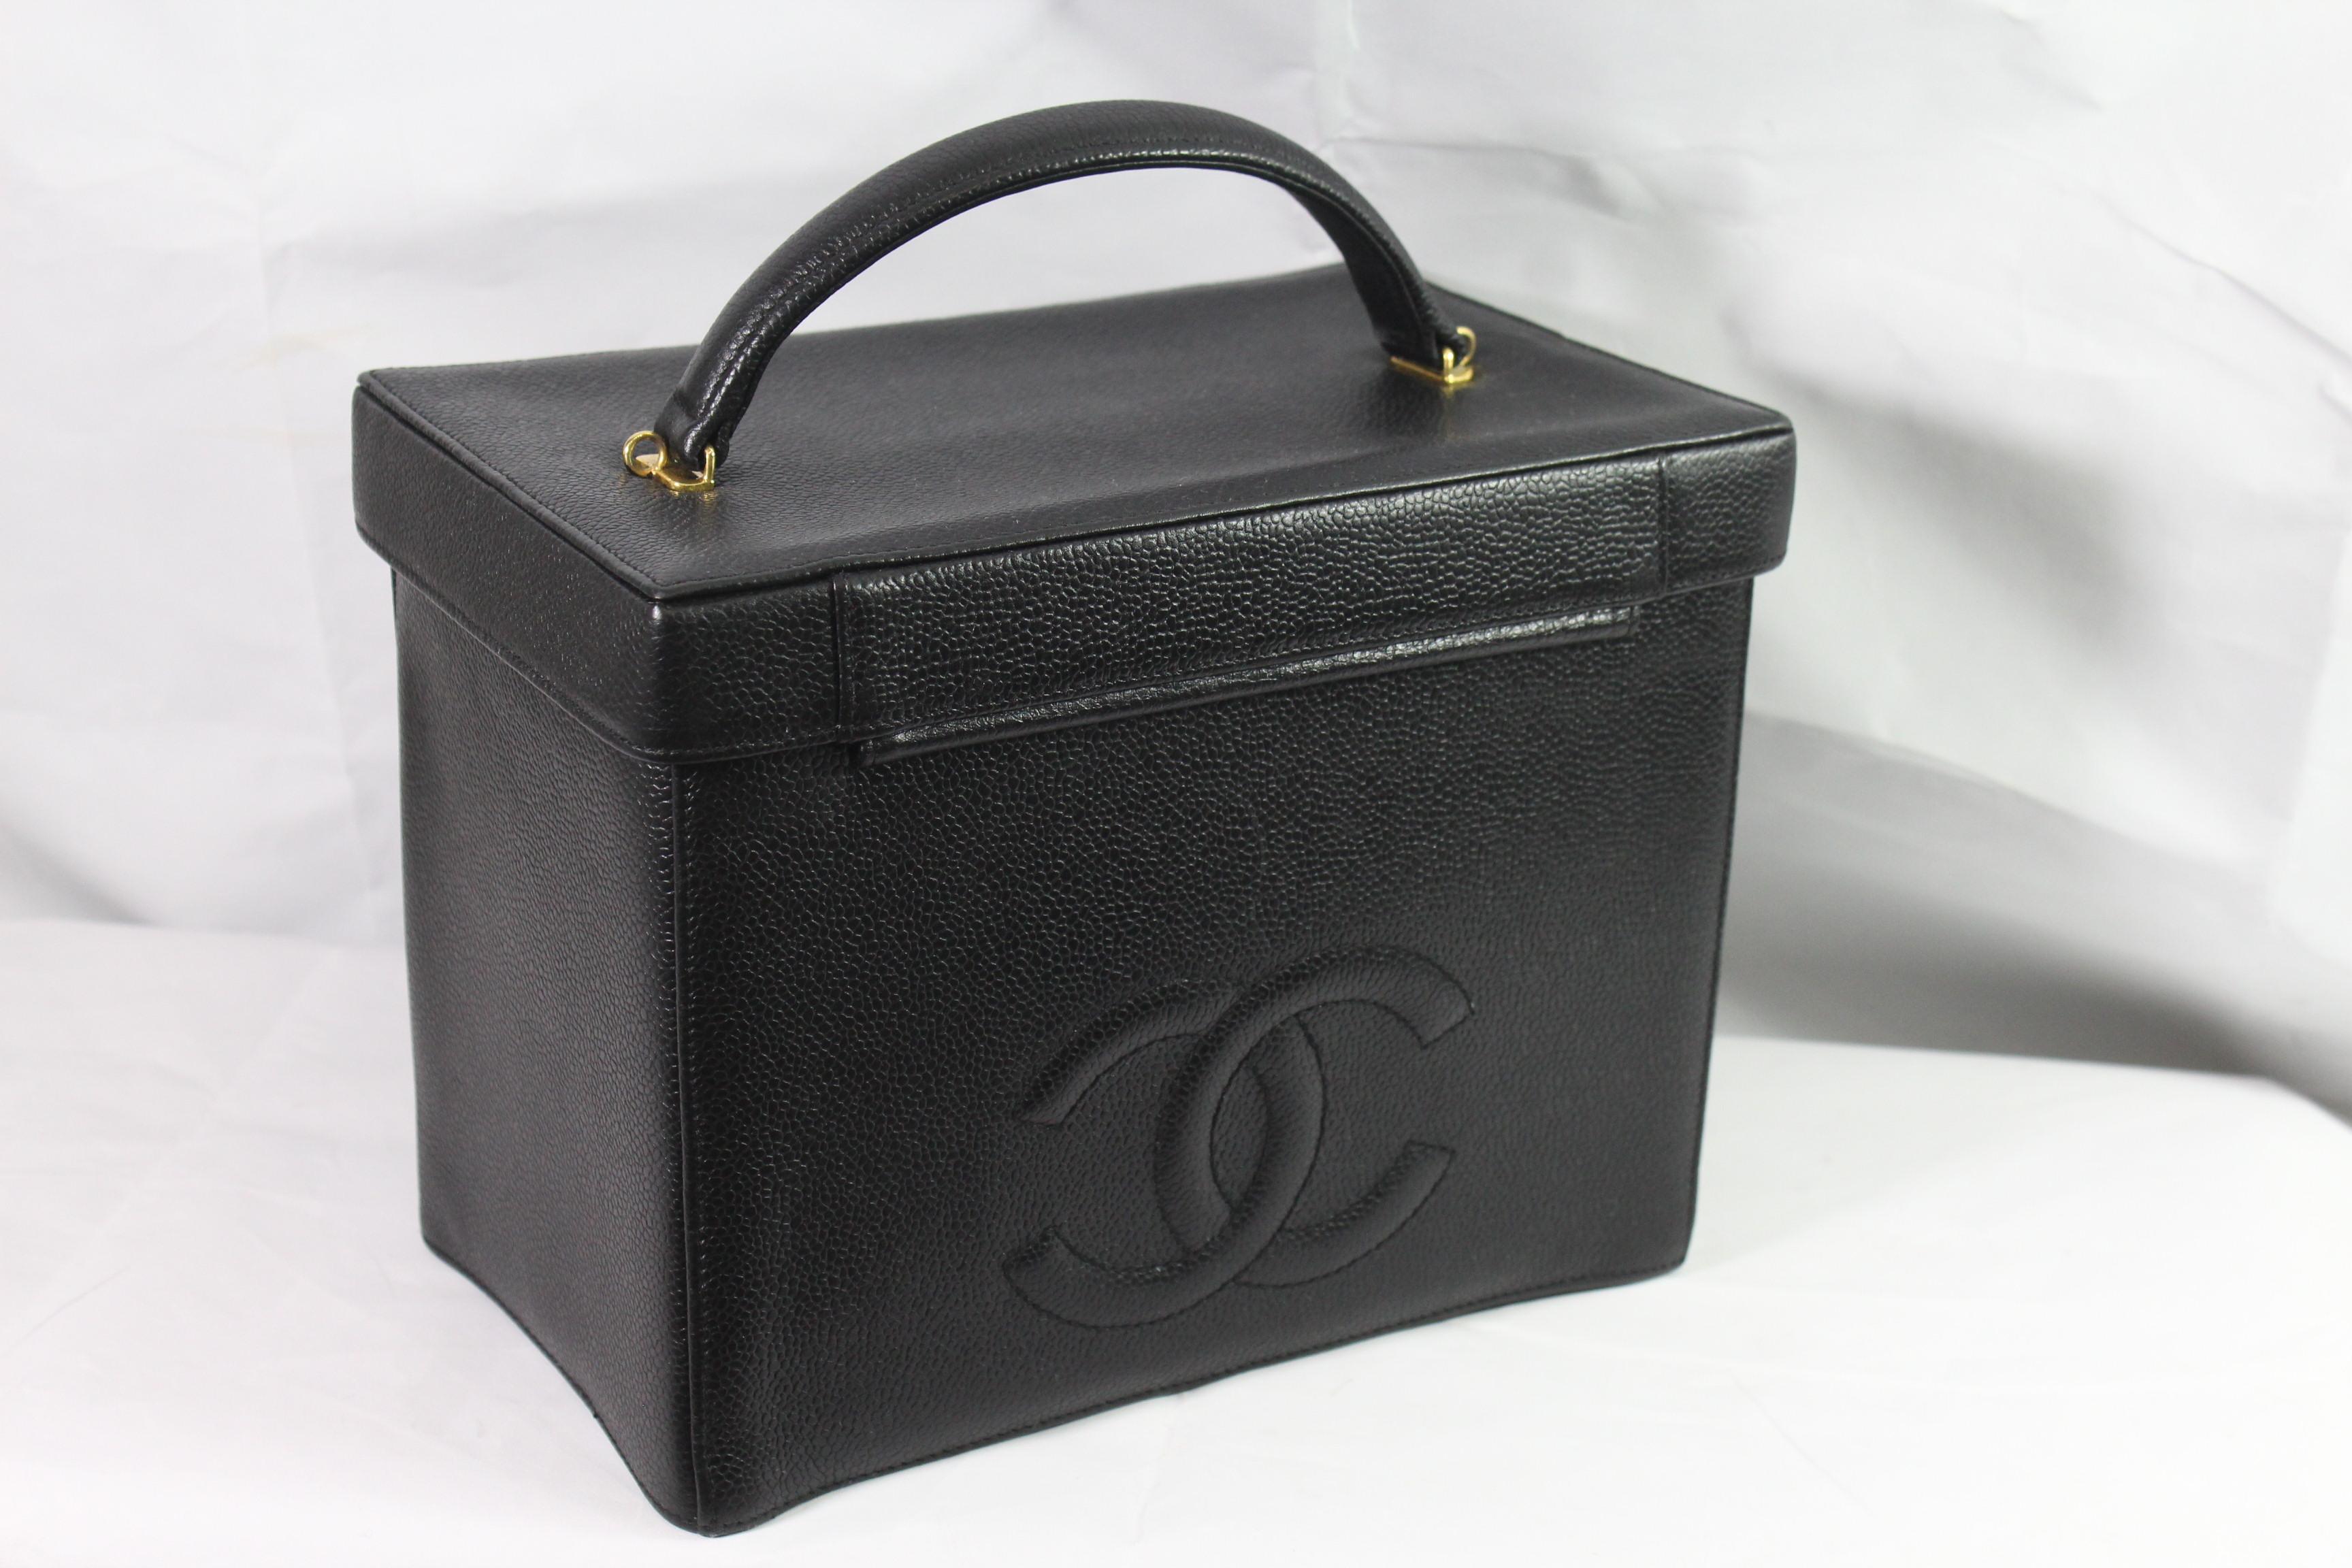 Vintage Chanel Vanity case in black caviar leatherand golden hardware. 

Possible to attach a strap and wear it as a shoulder bag

Good vintage condition, it has some small signs of use.

With card